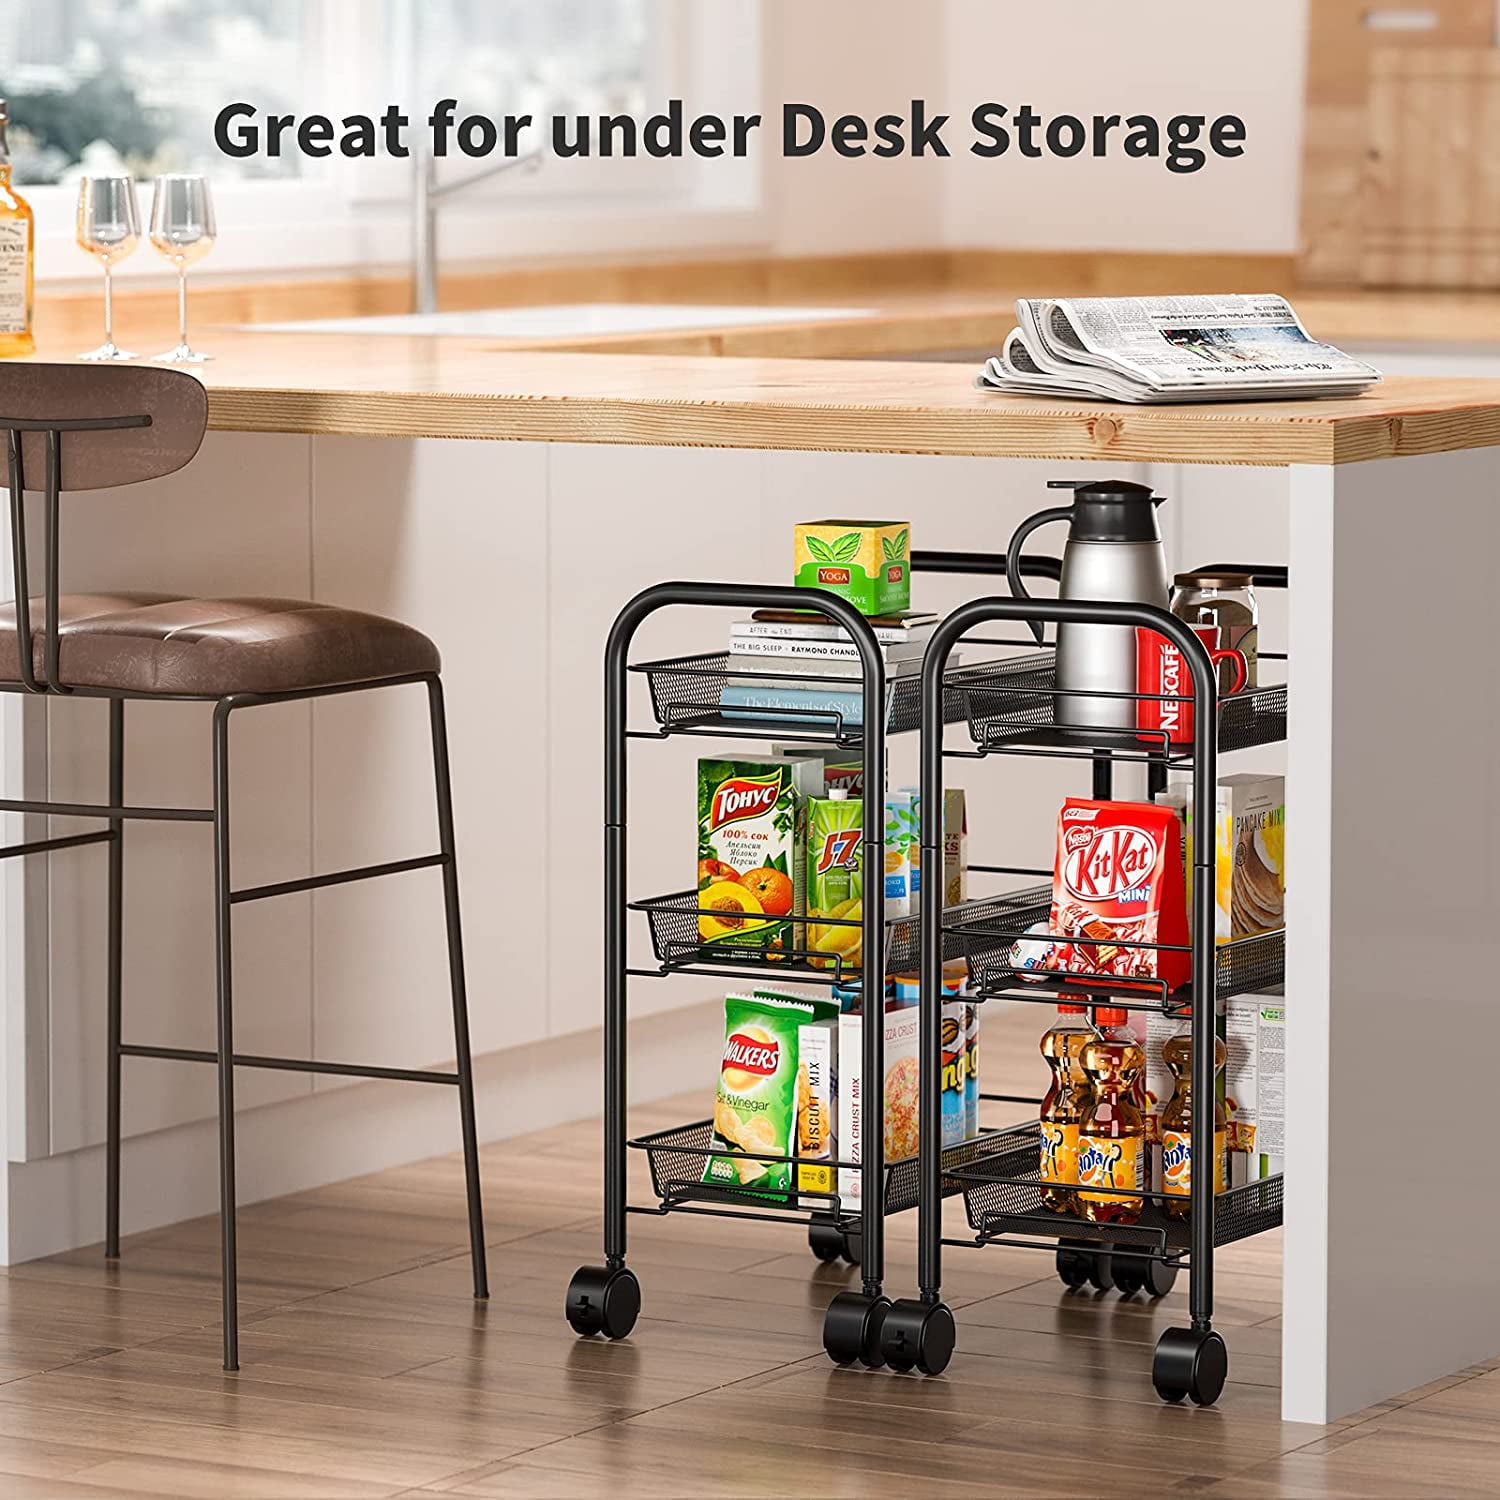 AMERIERGO 3-Tier Rolling Utility Cart Multifunction Metal Storage Cart with 3 Wire Baskets and Lockable Wheels for Home， Office， Kitchen， Bathroom， Bedroom